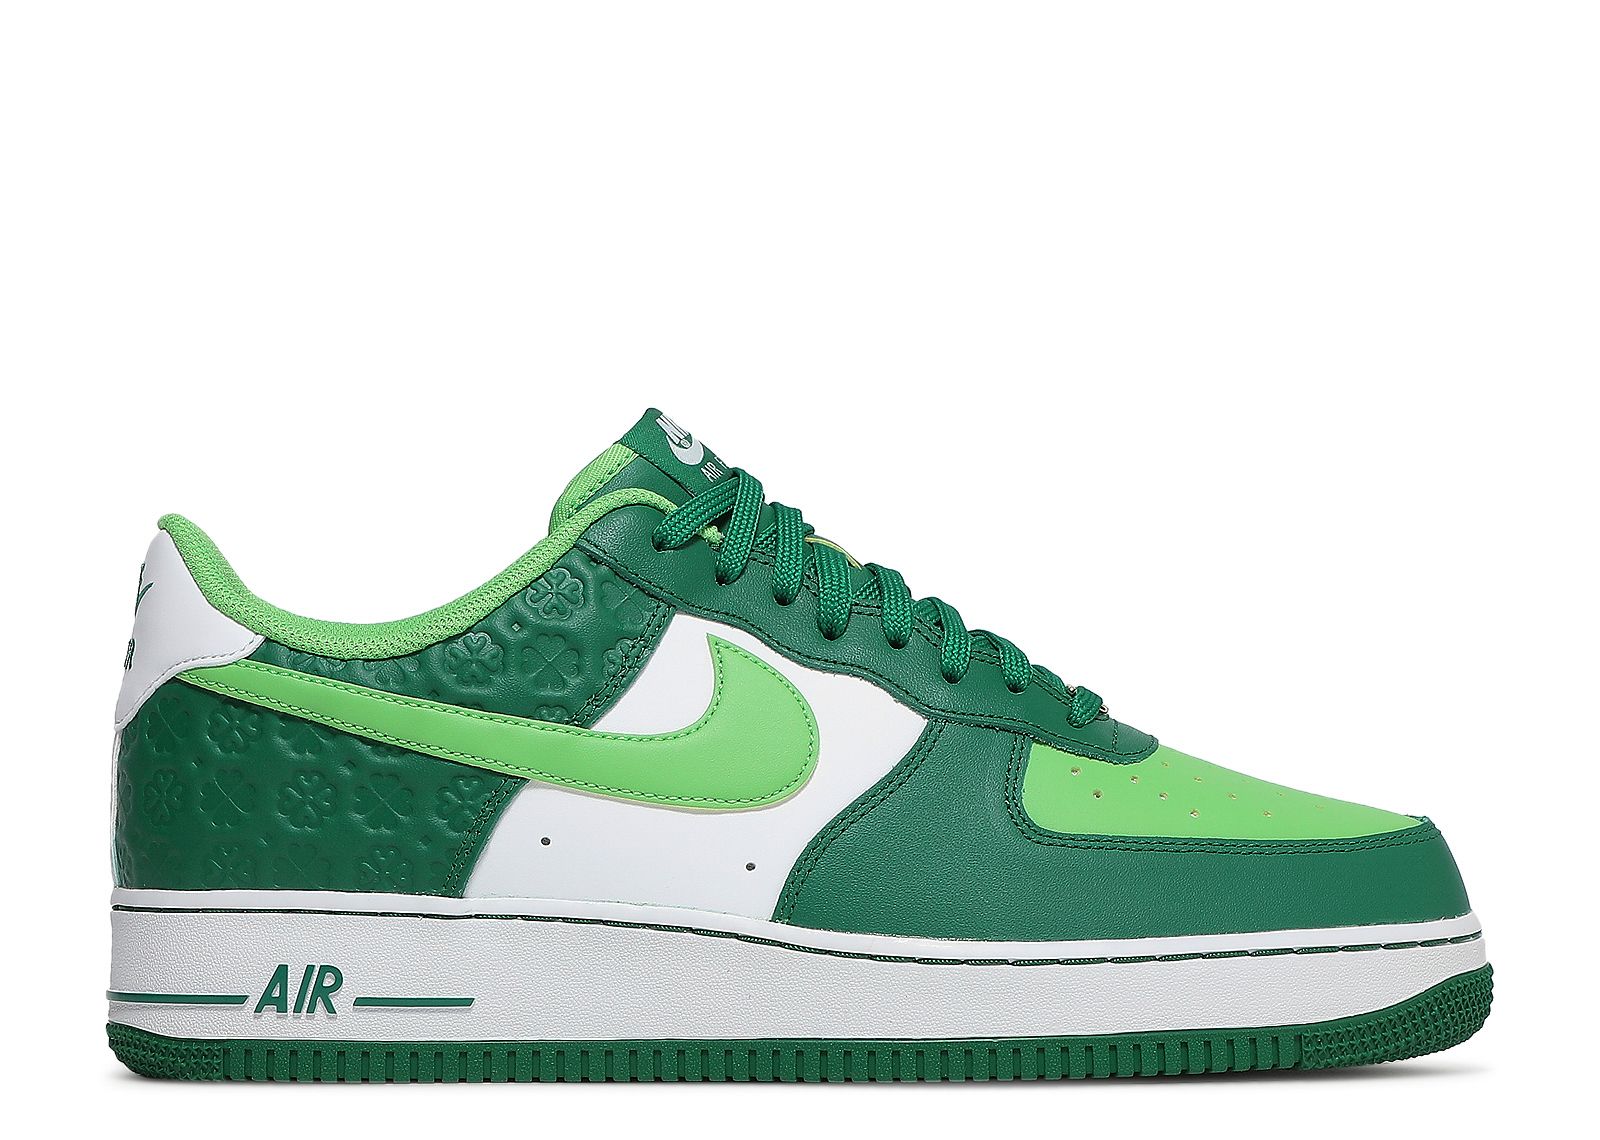 Air Force 1 Low 'St. Patrick's Day' - Nike - DD8458 300 - pine green ...